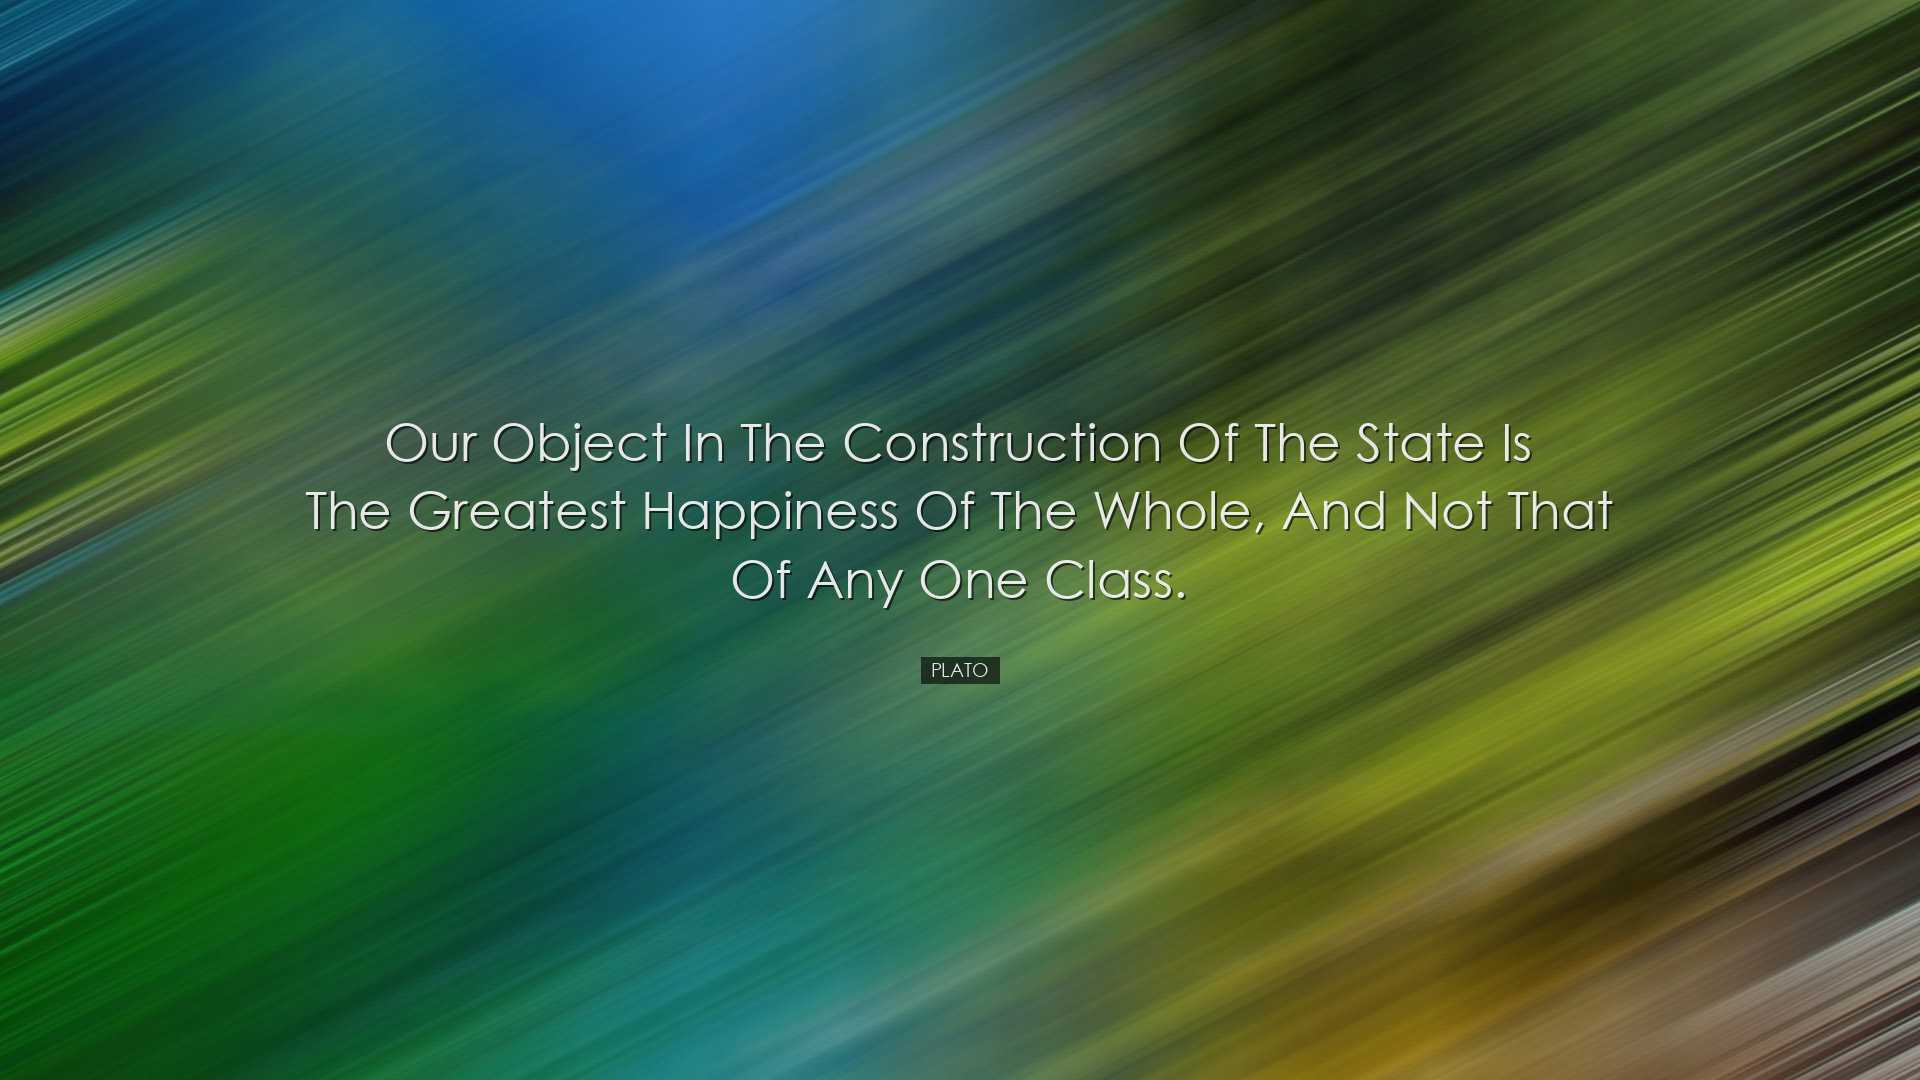 Our object in the construction of the state is the greatest happin